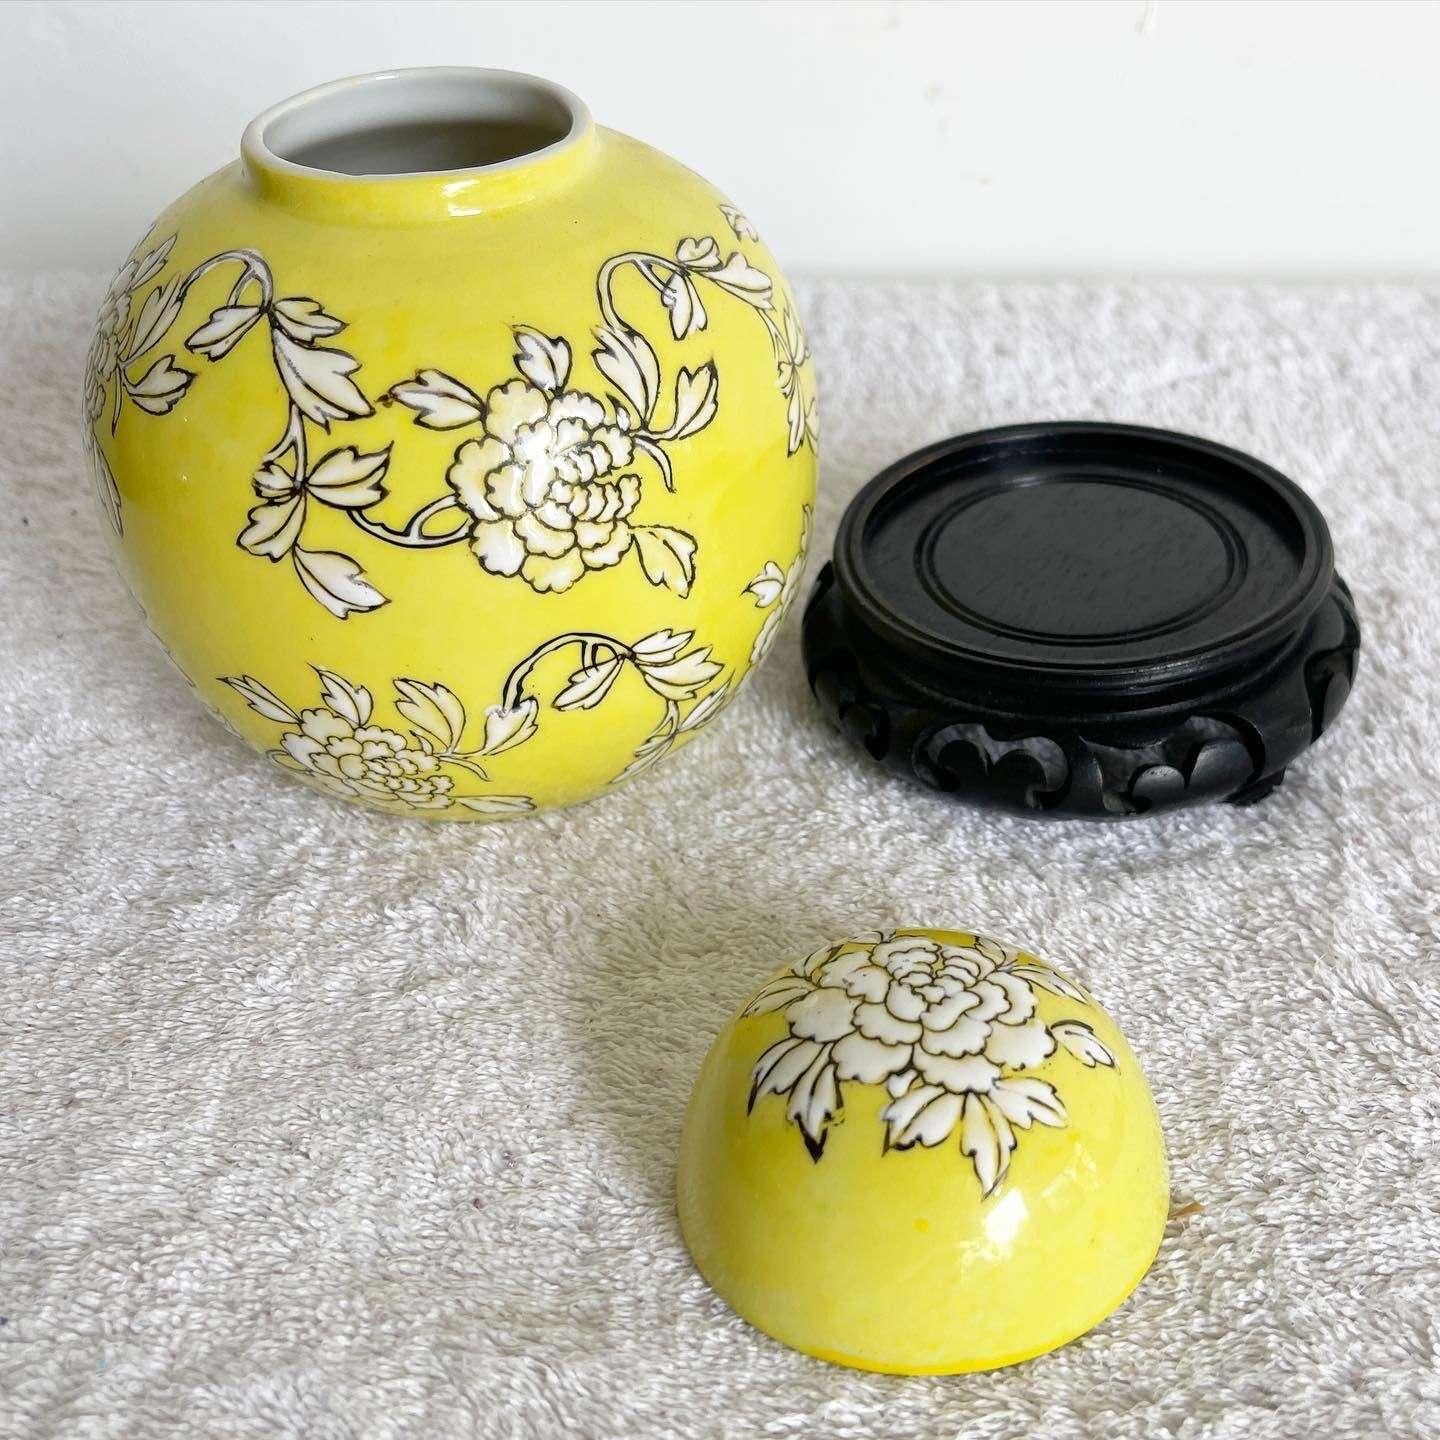 Chinese Yellow Floral Ginger Jar With Metal and Ceramic Plate - 2 Pieces In Good Condition For Sale In Delray Beach, FL